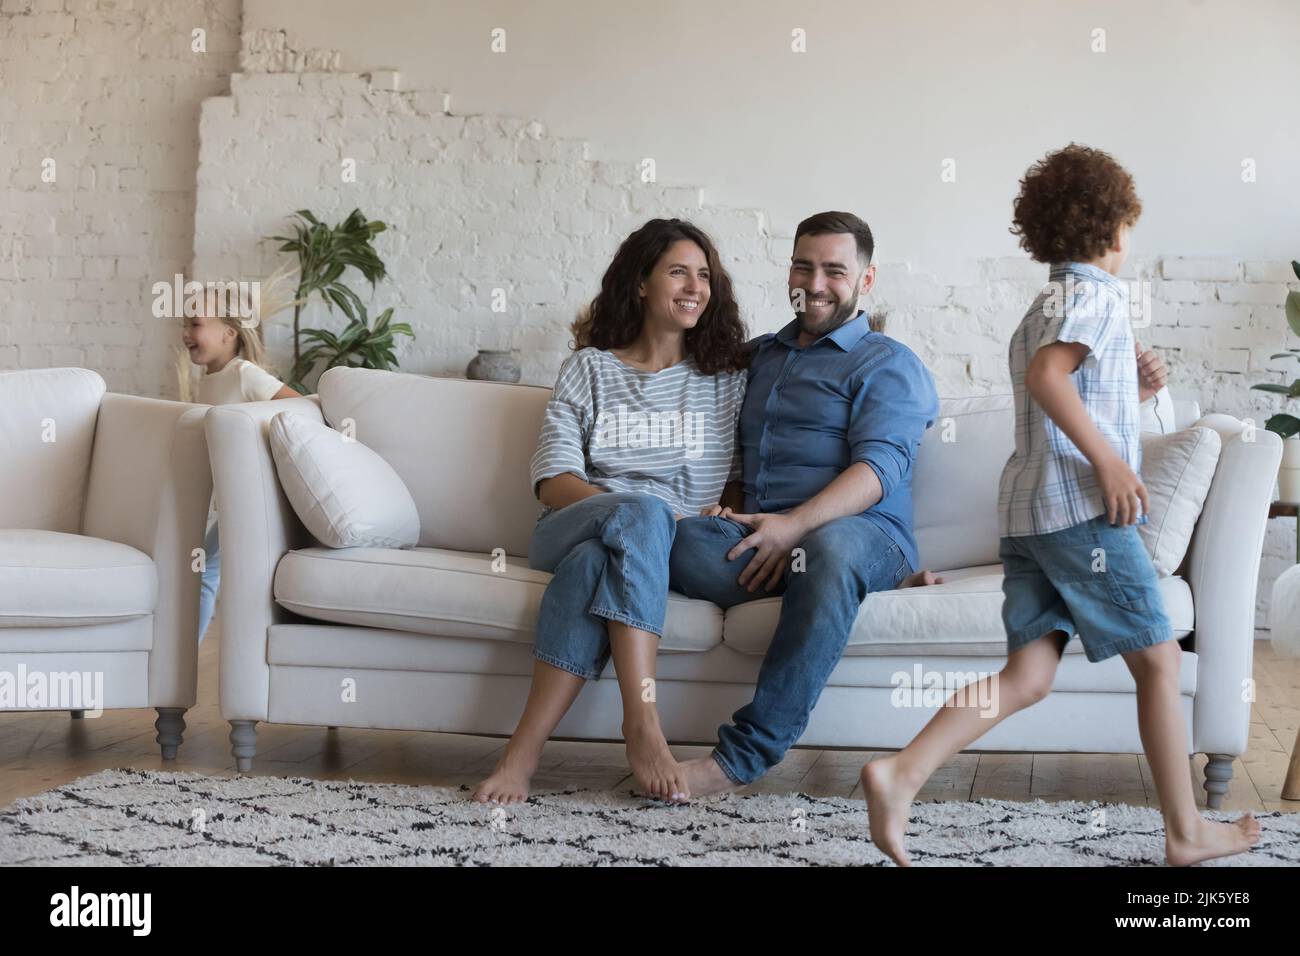 Happy parents watching two hyperactive energetic little sibling kids Stock Photo